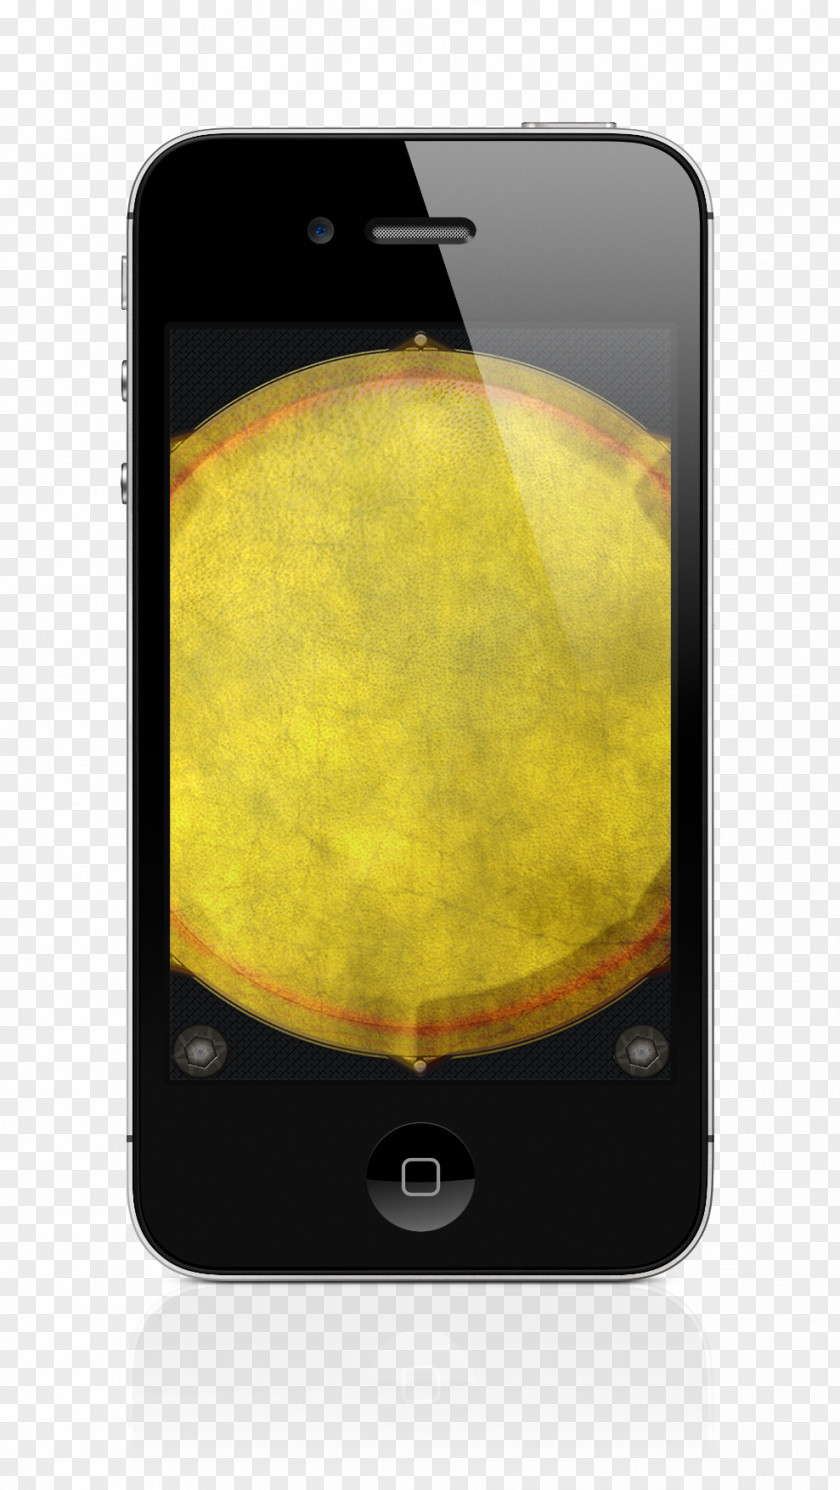 Djembe IPhone 4S Apple 6 5s PNG